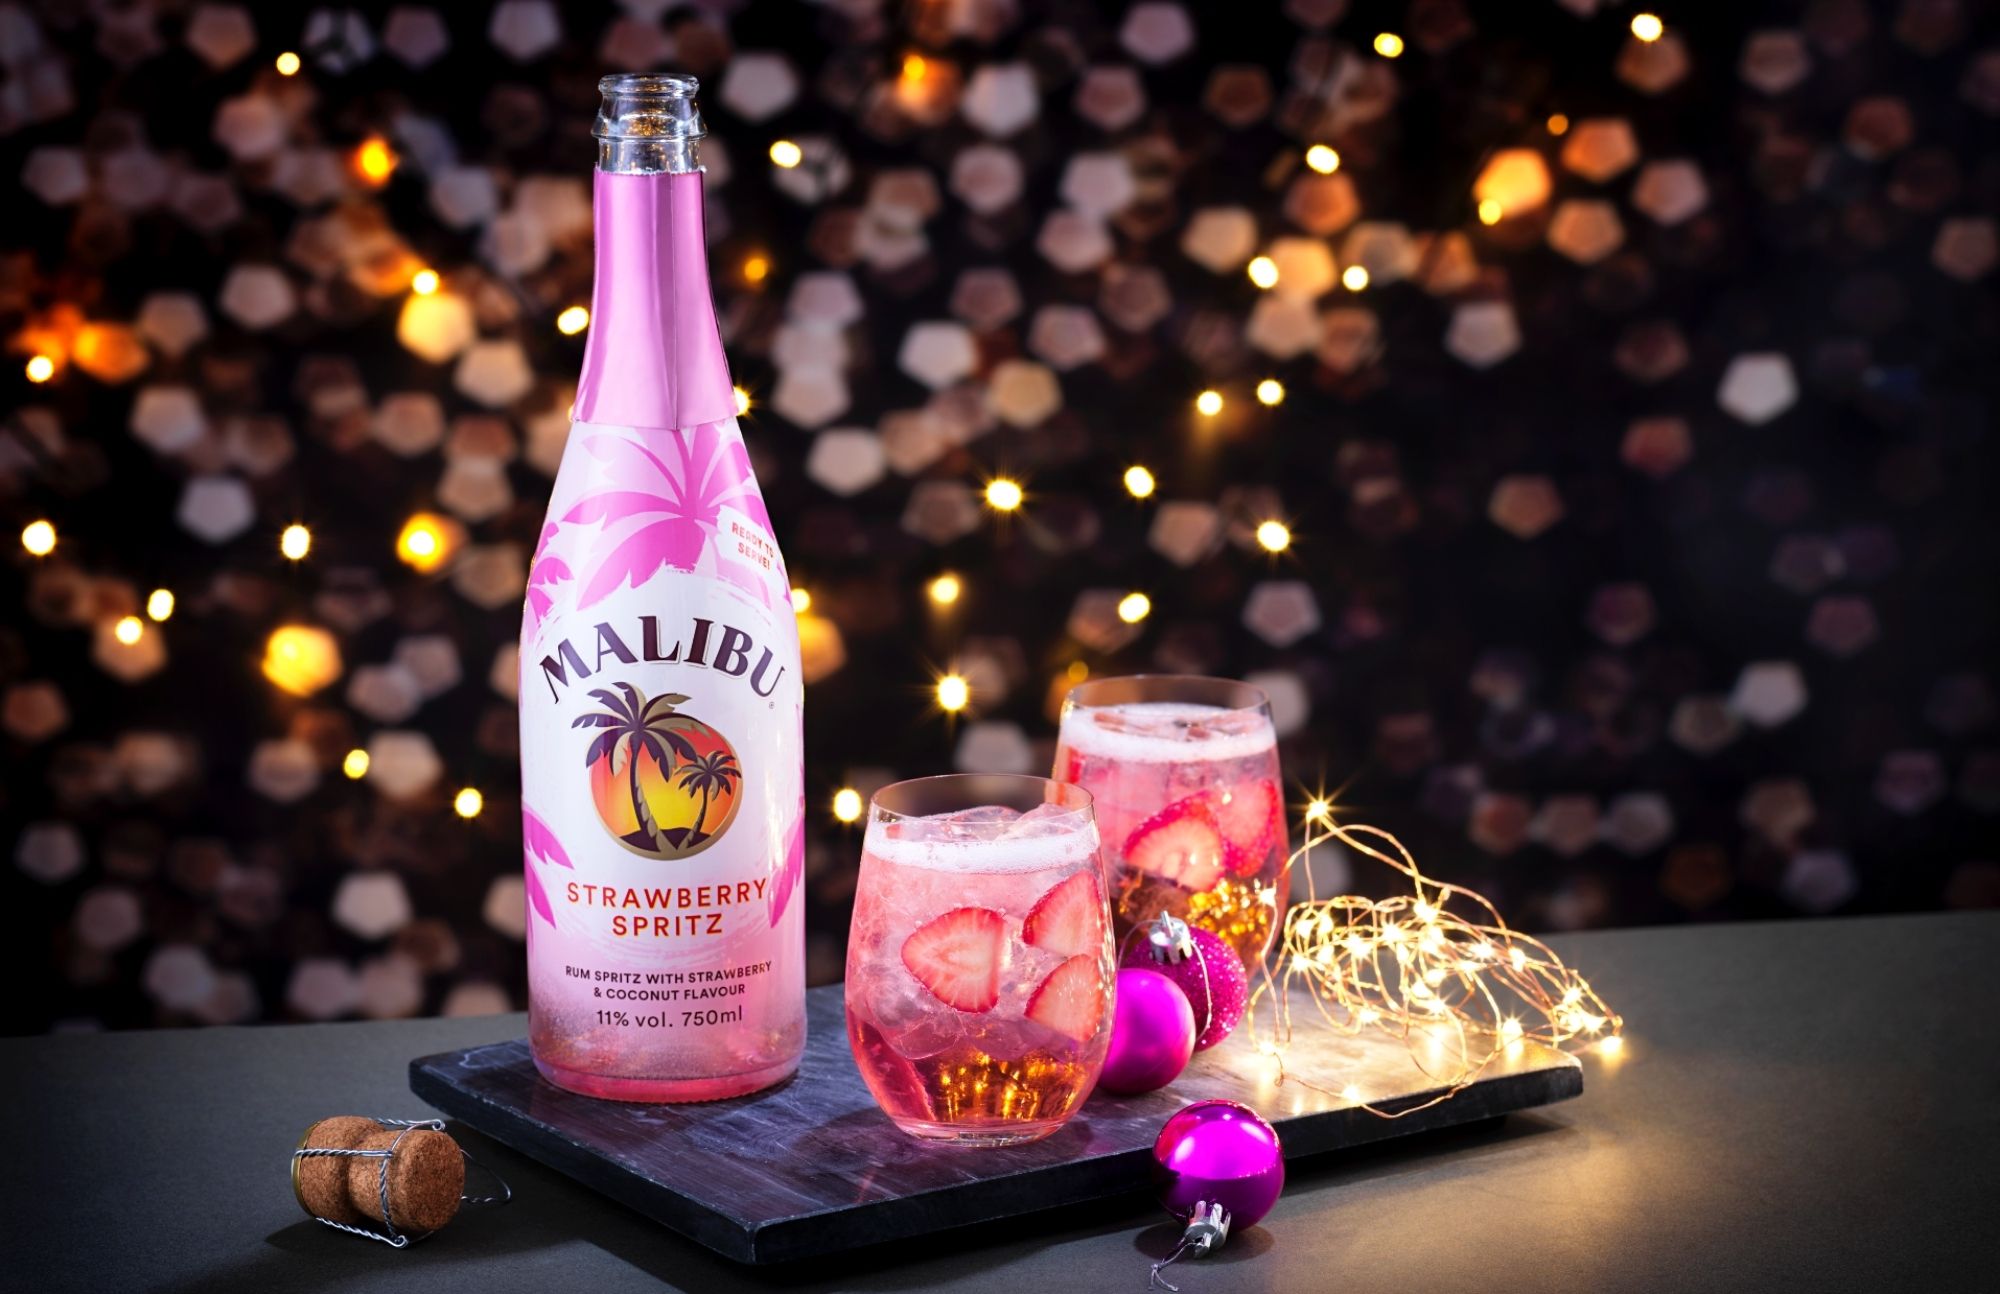 Experience The Power Of Pink In Every Shot Of Malibu New Pink Strawberry Sparkling Rum